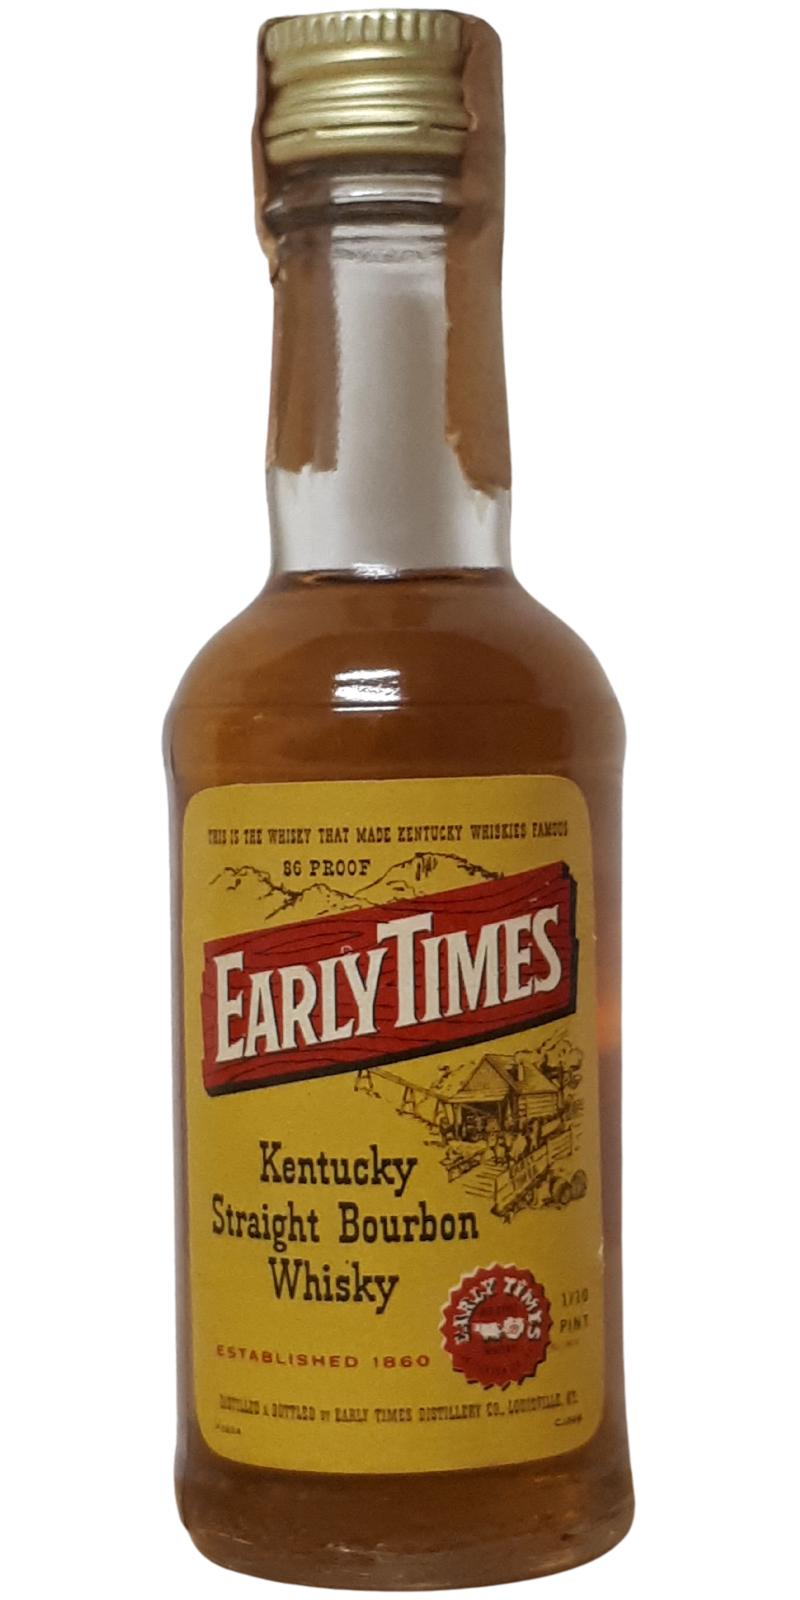 Early Times Kentucky Straight Bourbon Whiskey